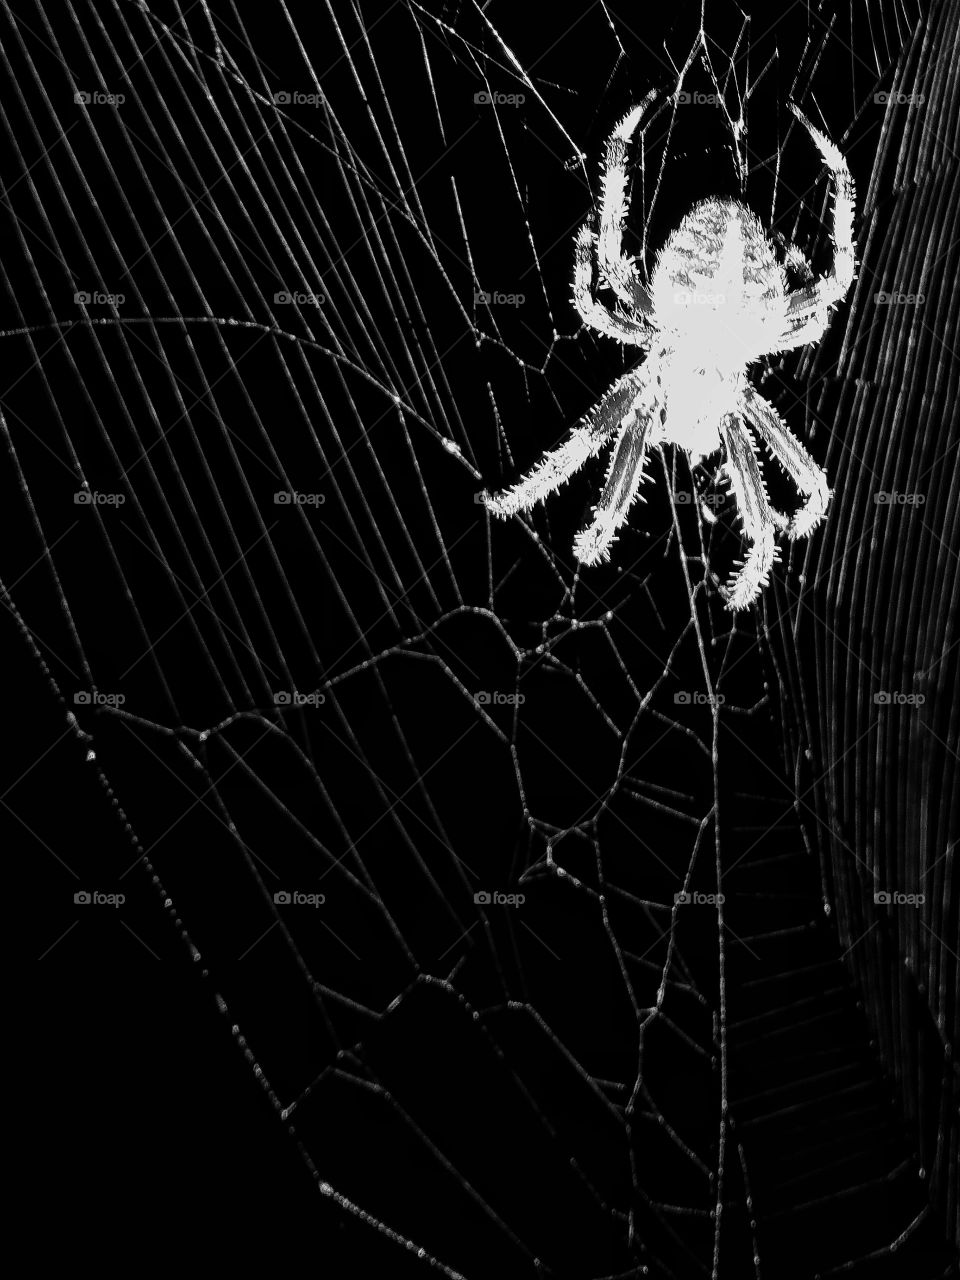 Night Spider. Almost ran into this big guy late last night. I didn't want to tear it down, so I just went through the back door.